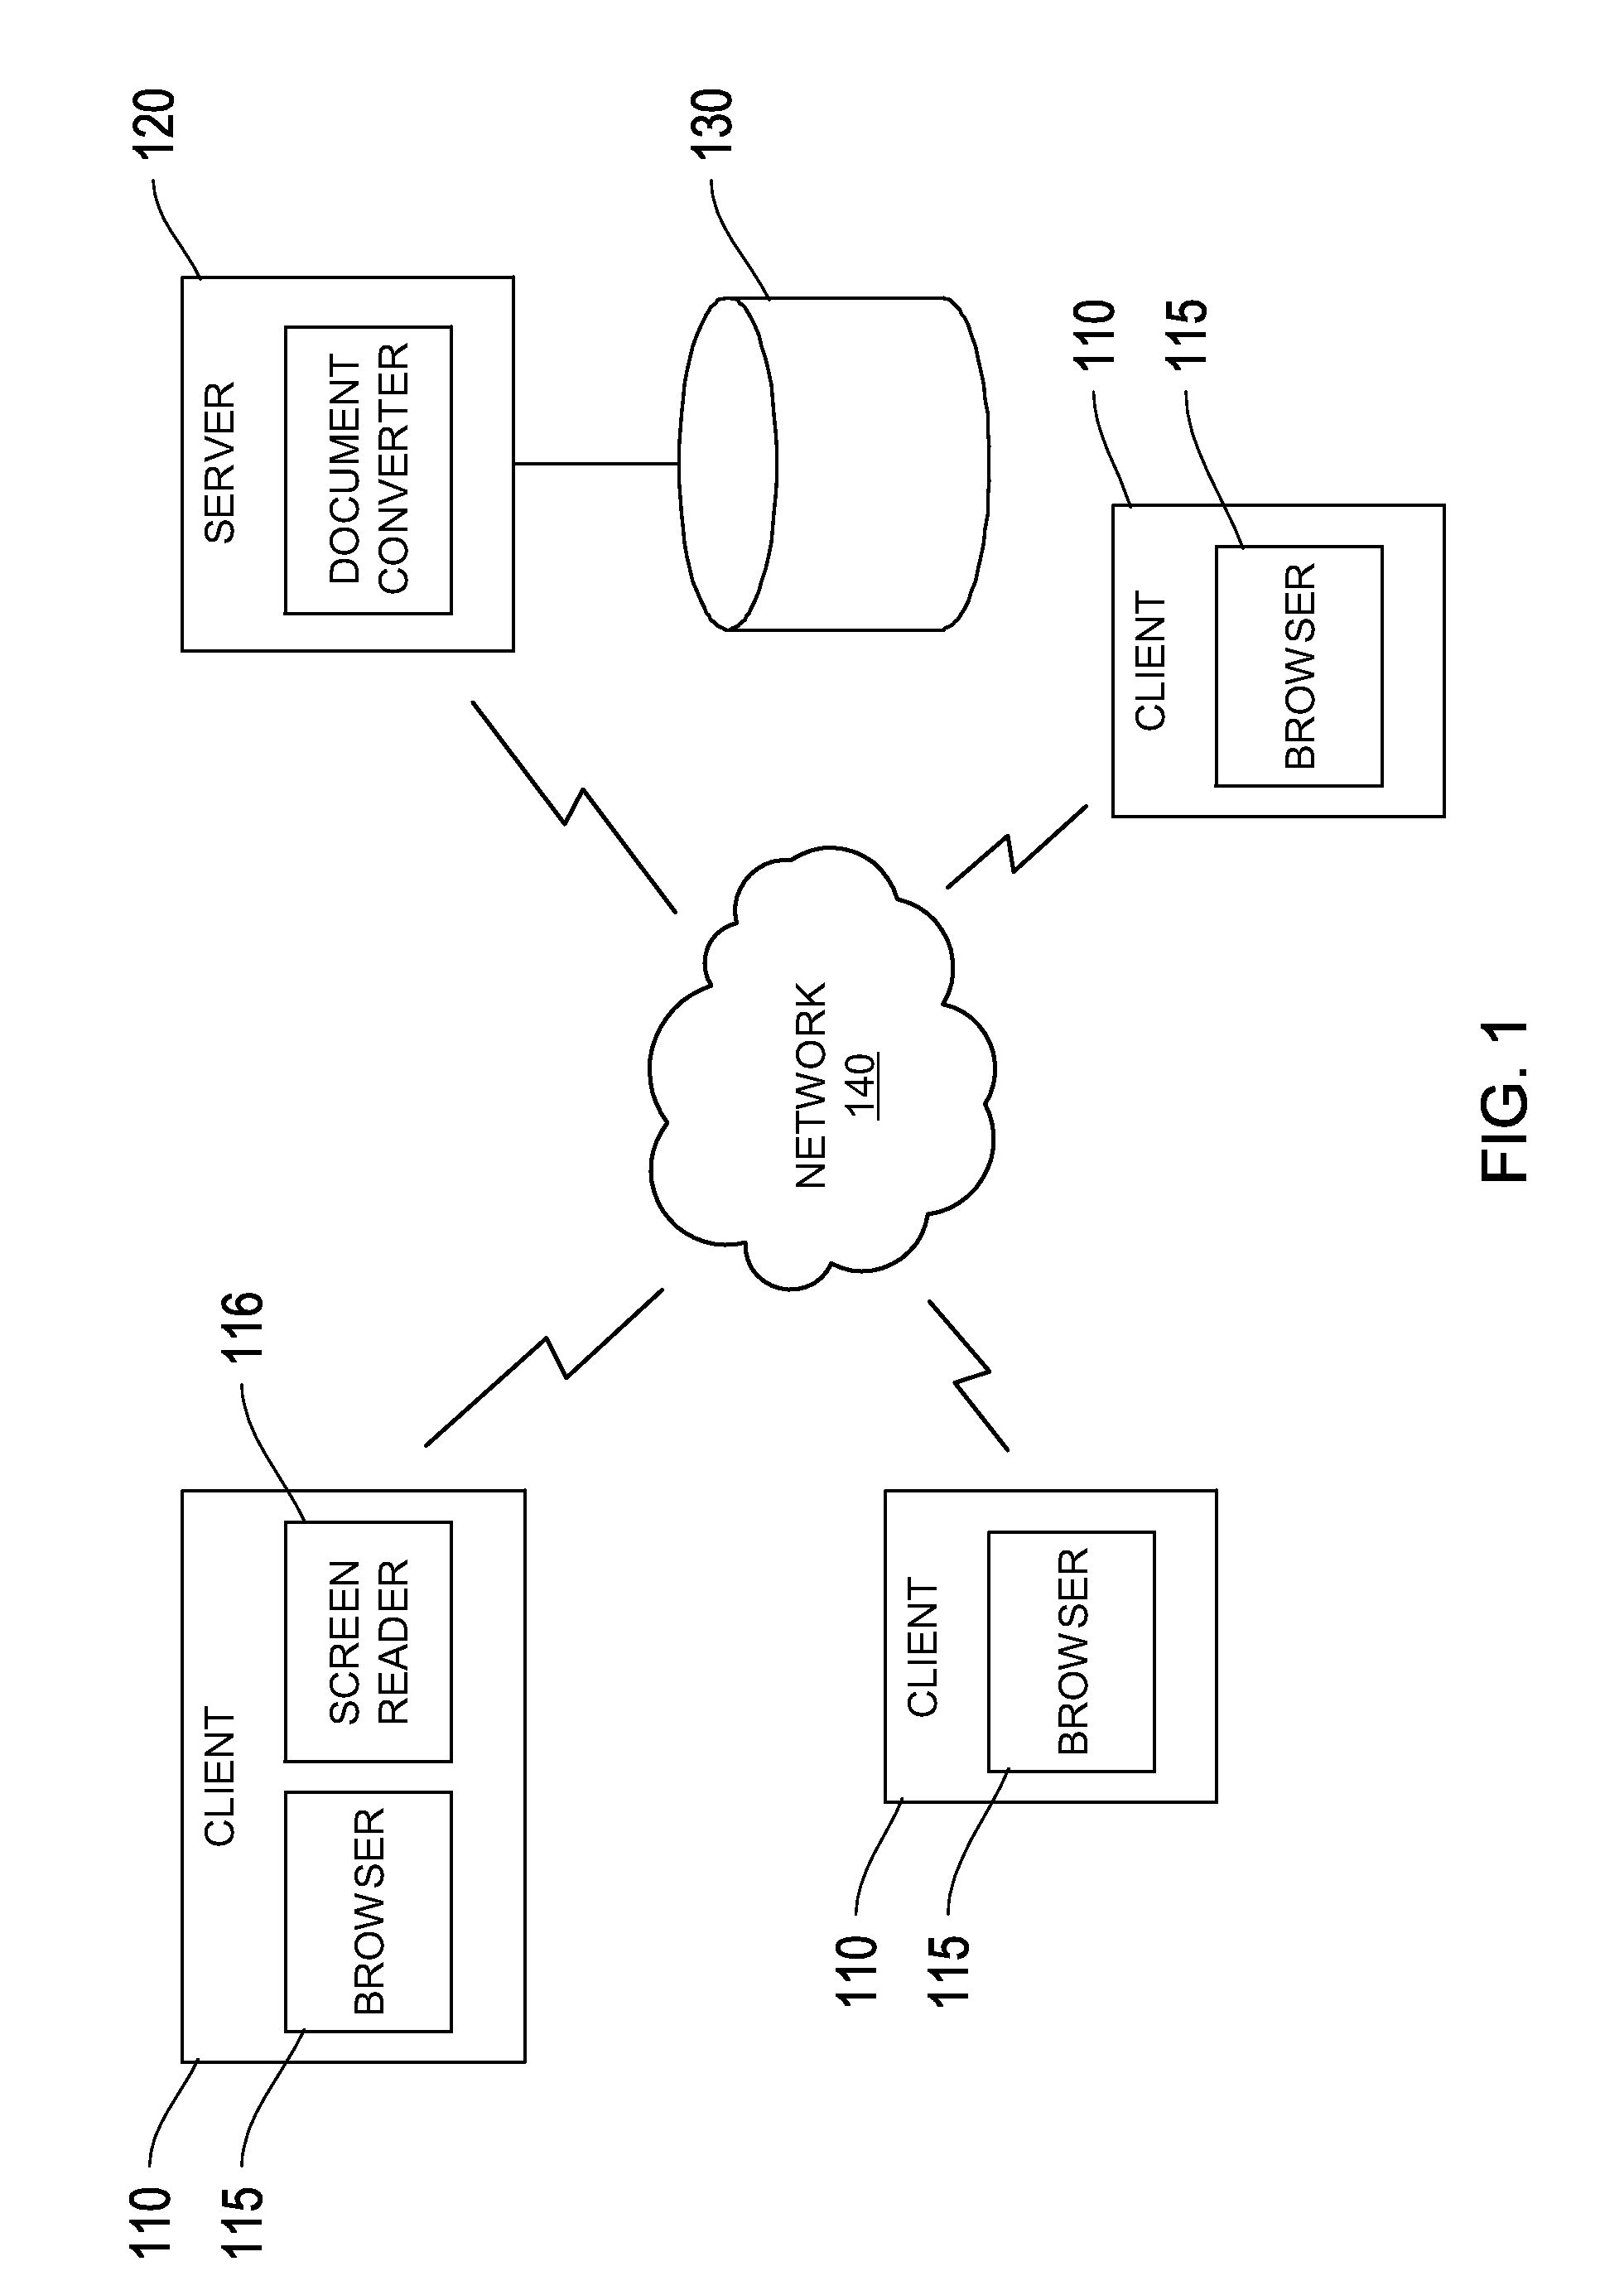 Systems and methods for rendering documents